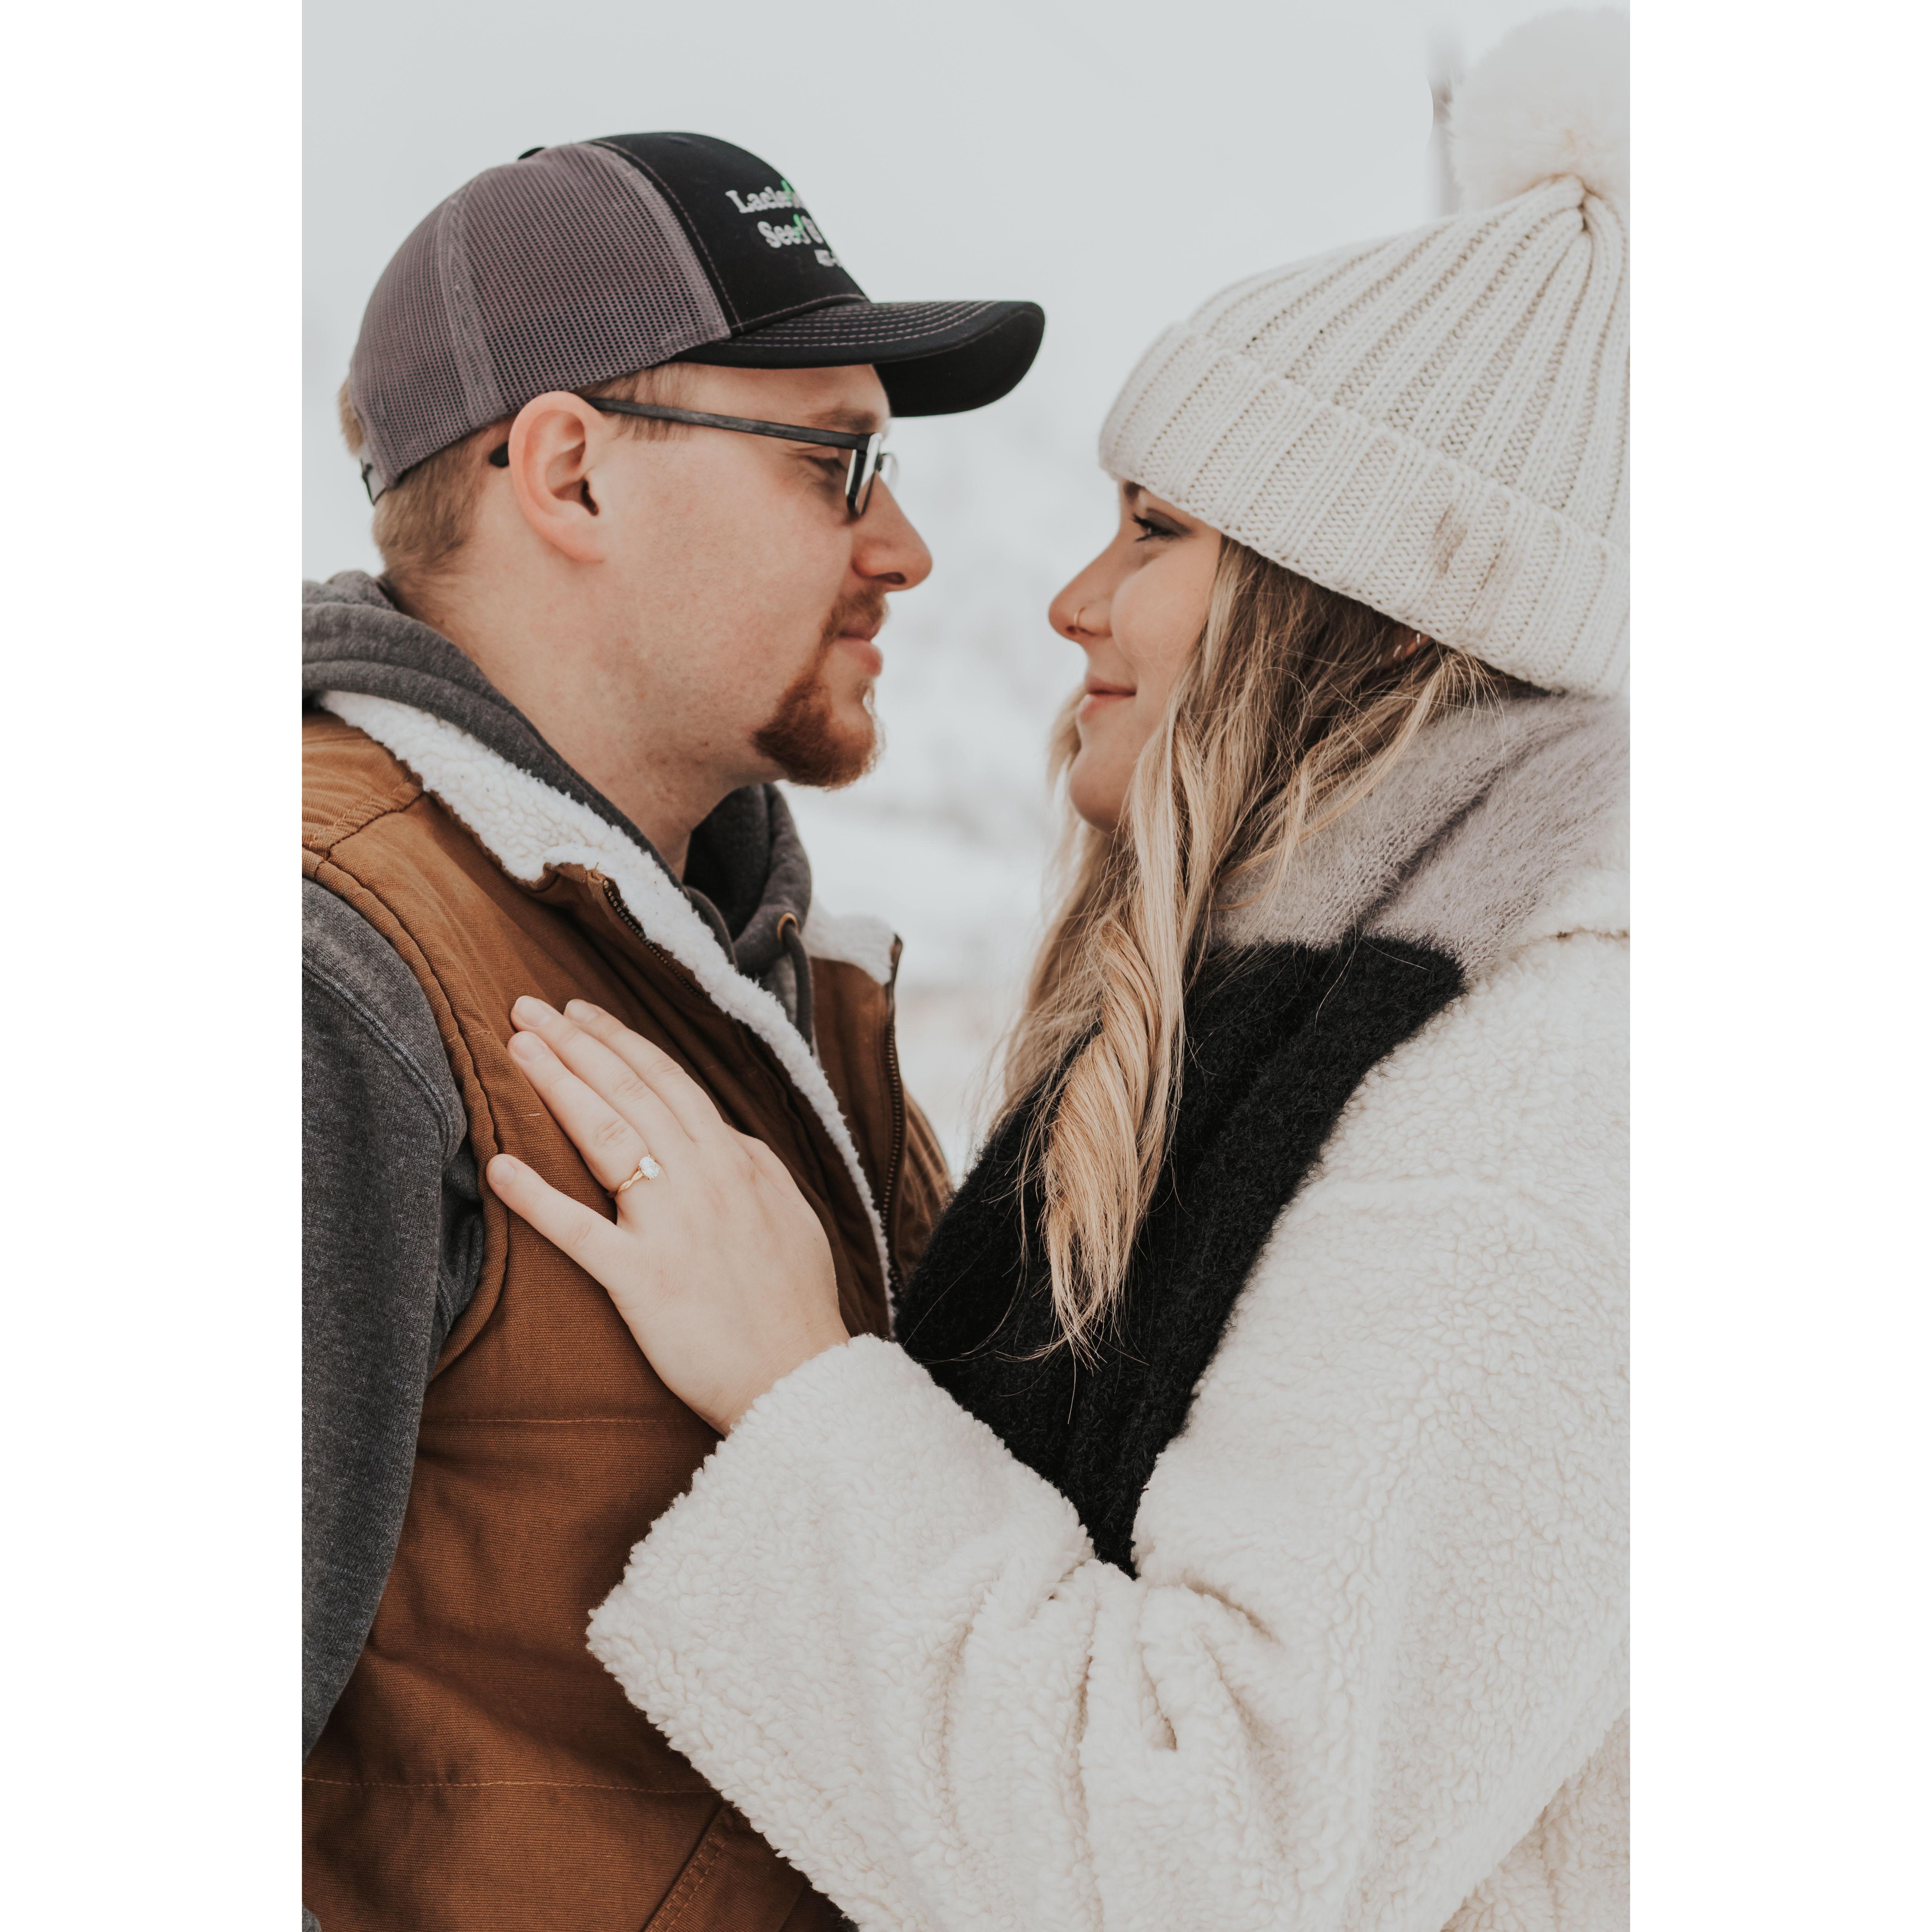 More engagement photos.